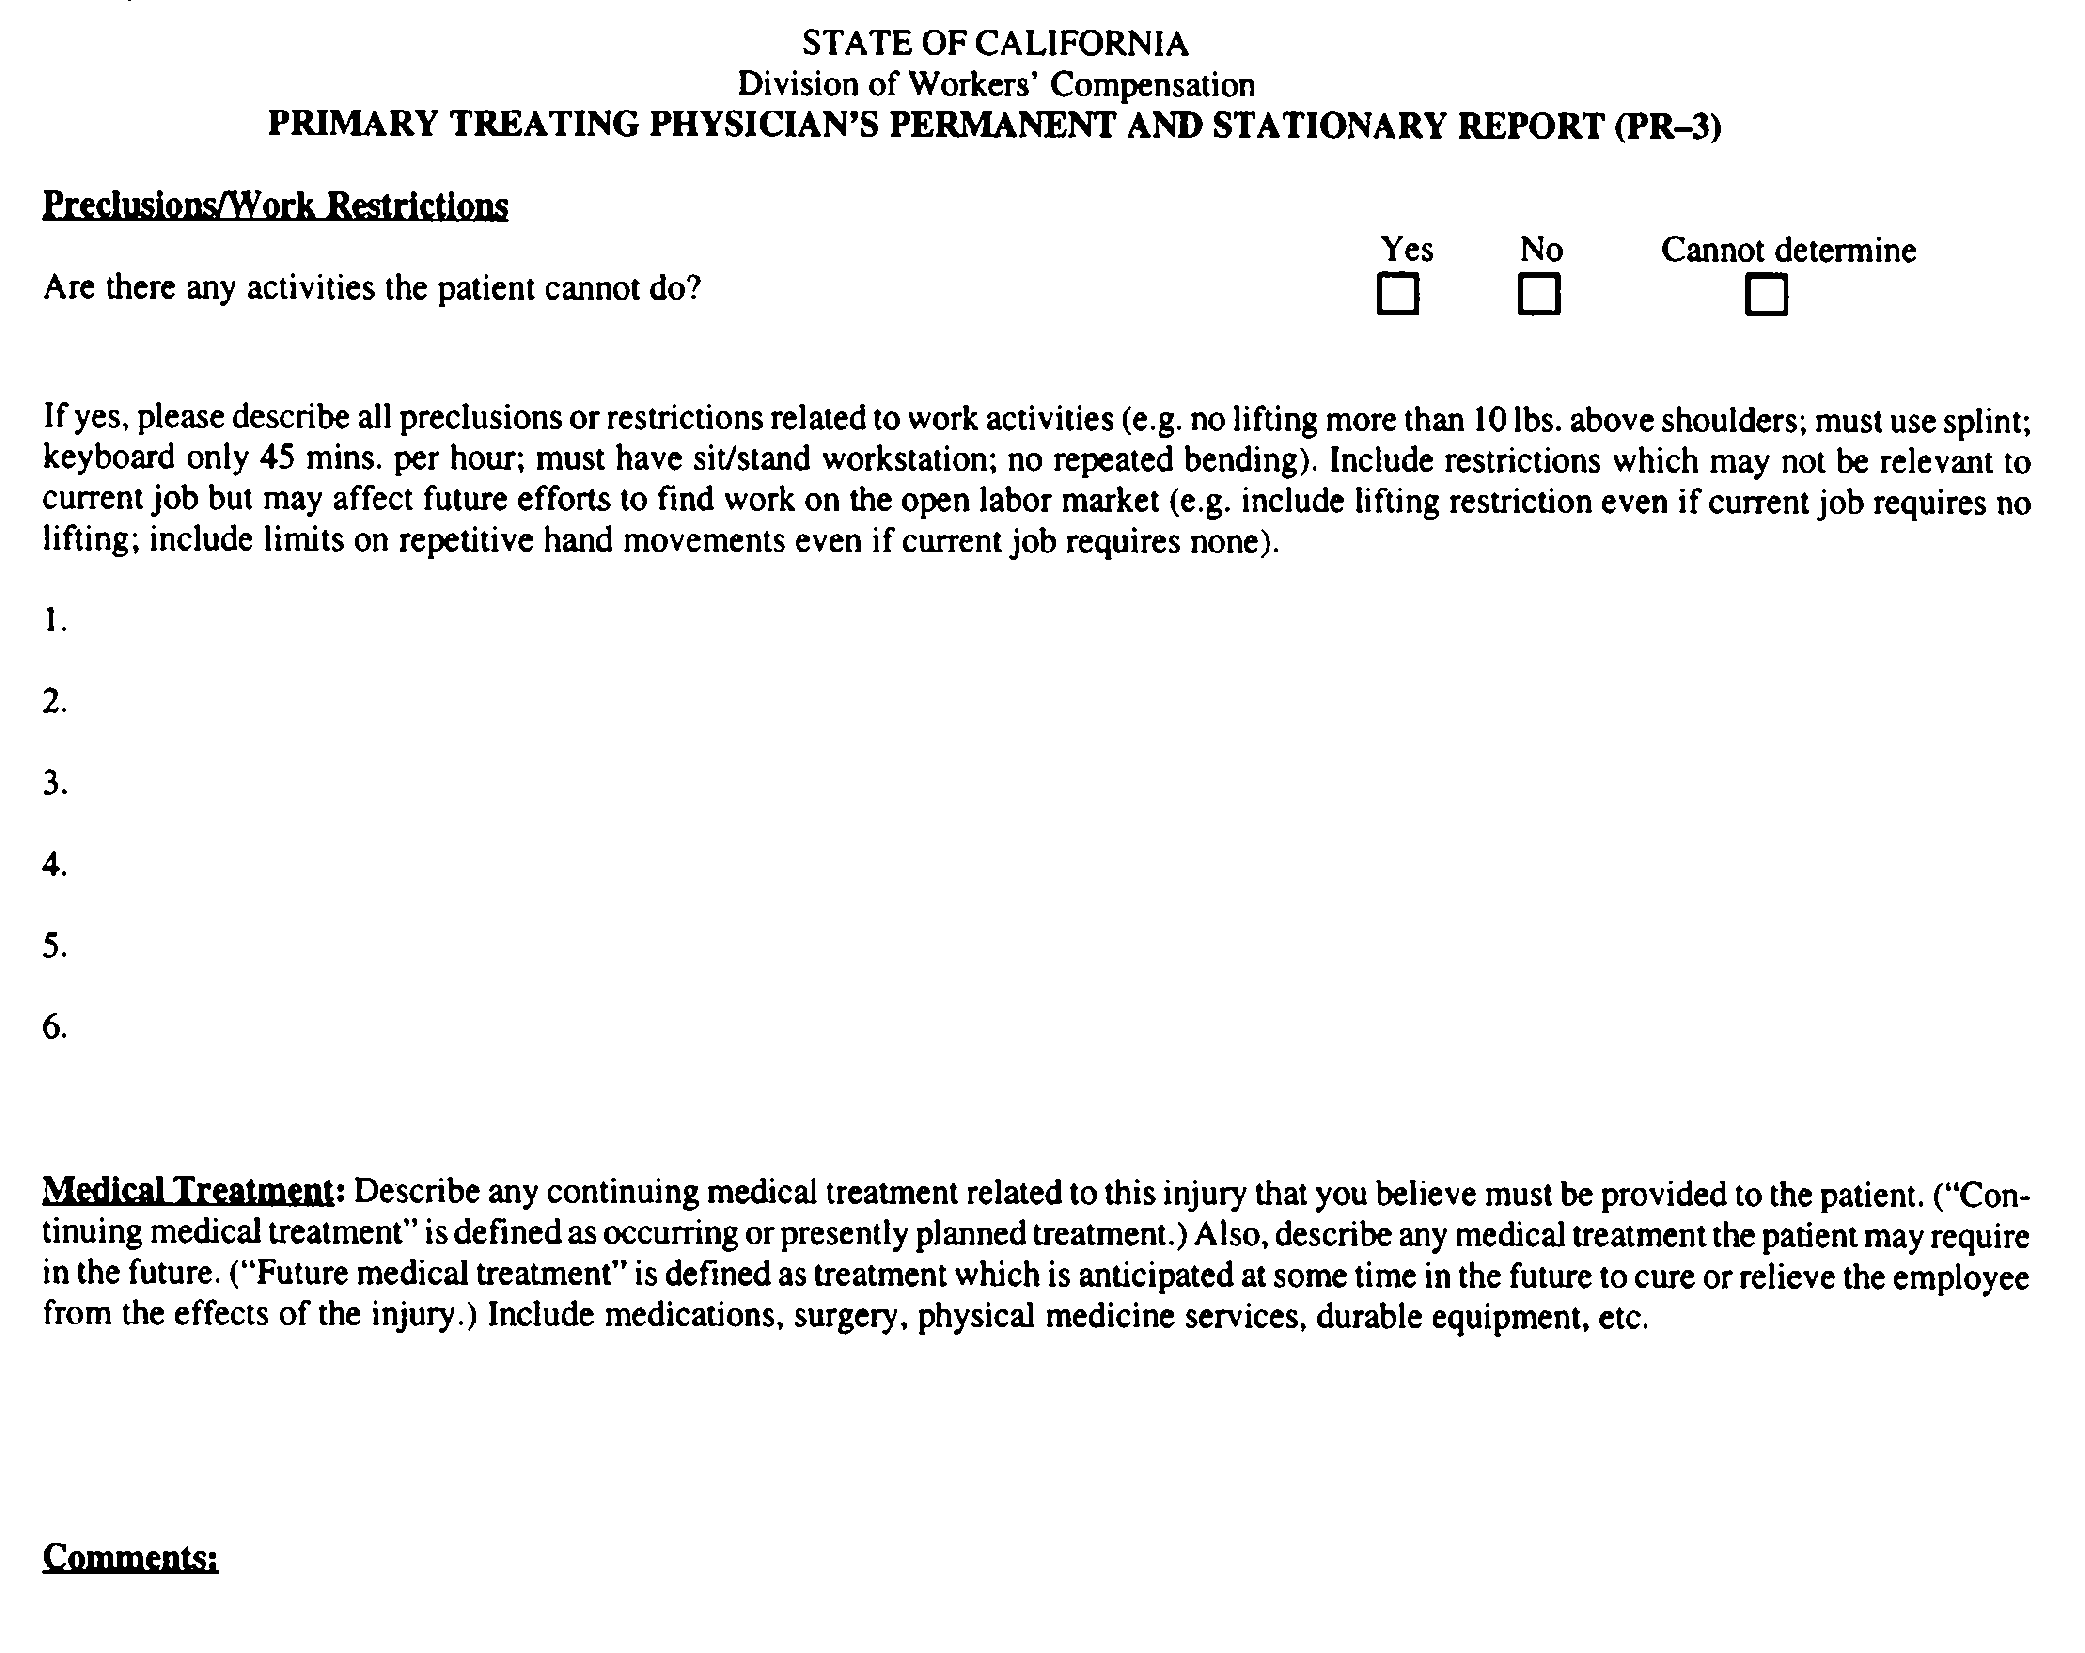 Image 4 within § 9785.3. Form PR-3 “Primary Treating Physician's Permanent and Stationary Report.”